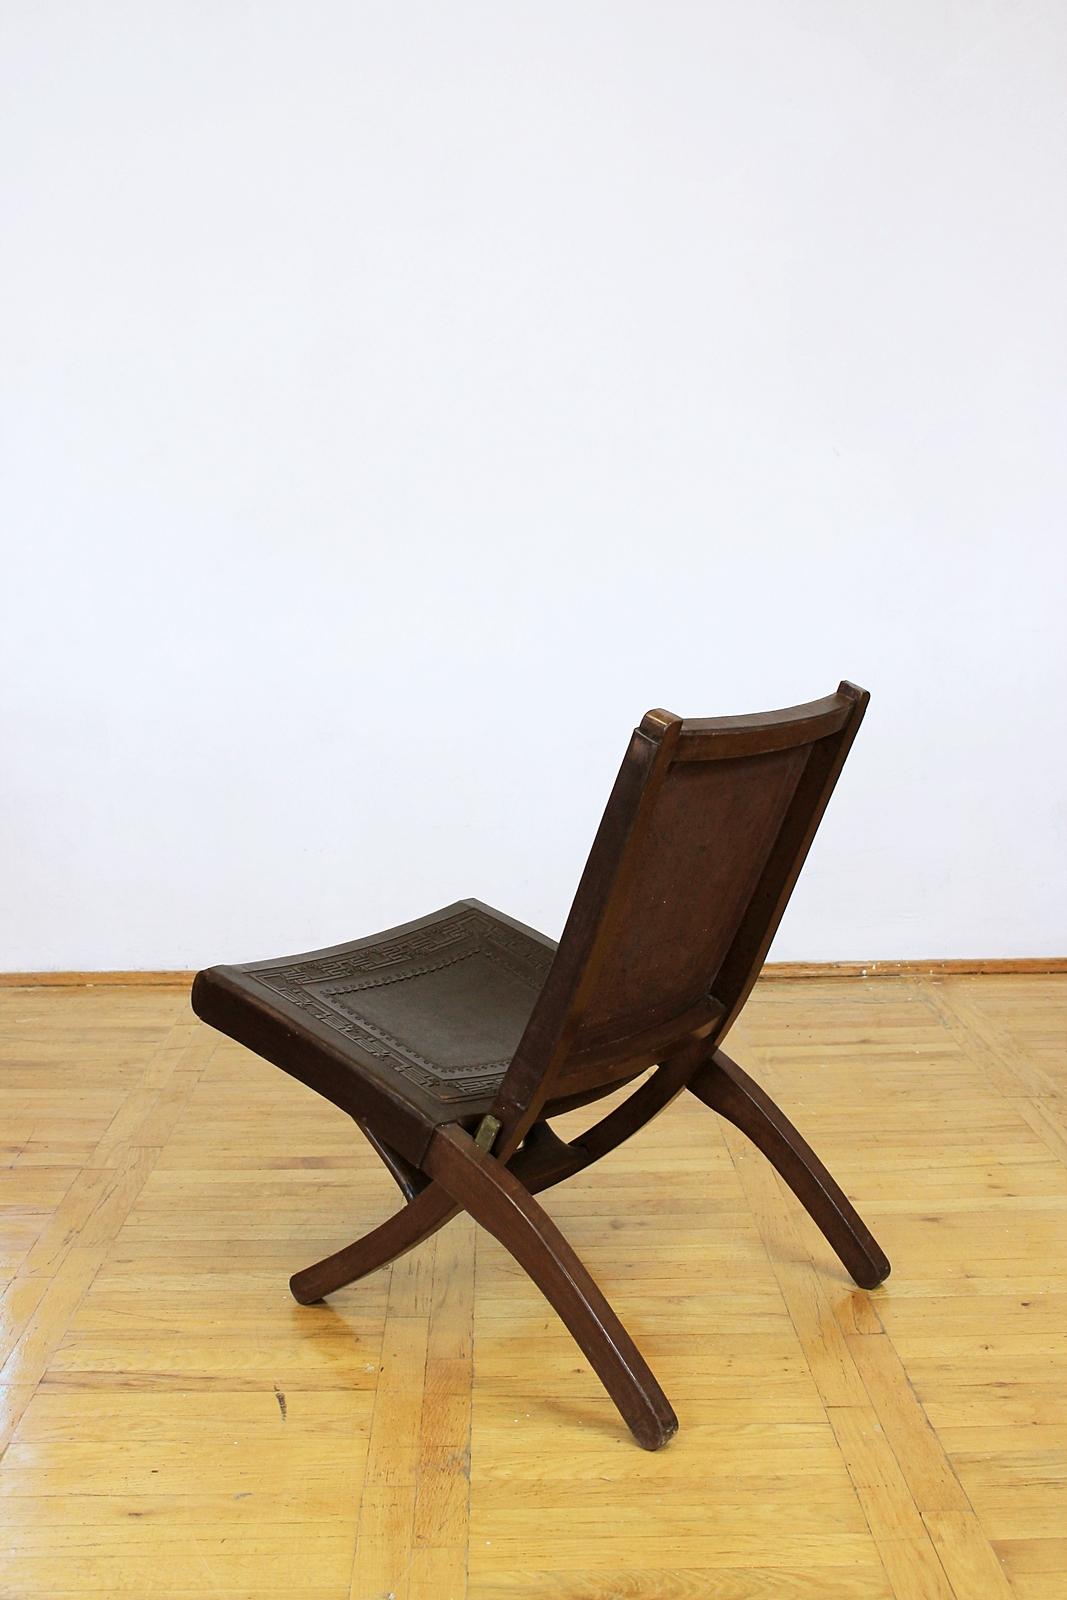 Cowhide Midcentury Peruvian Tooled Leather Folding Chair, 1970